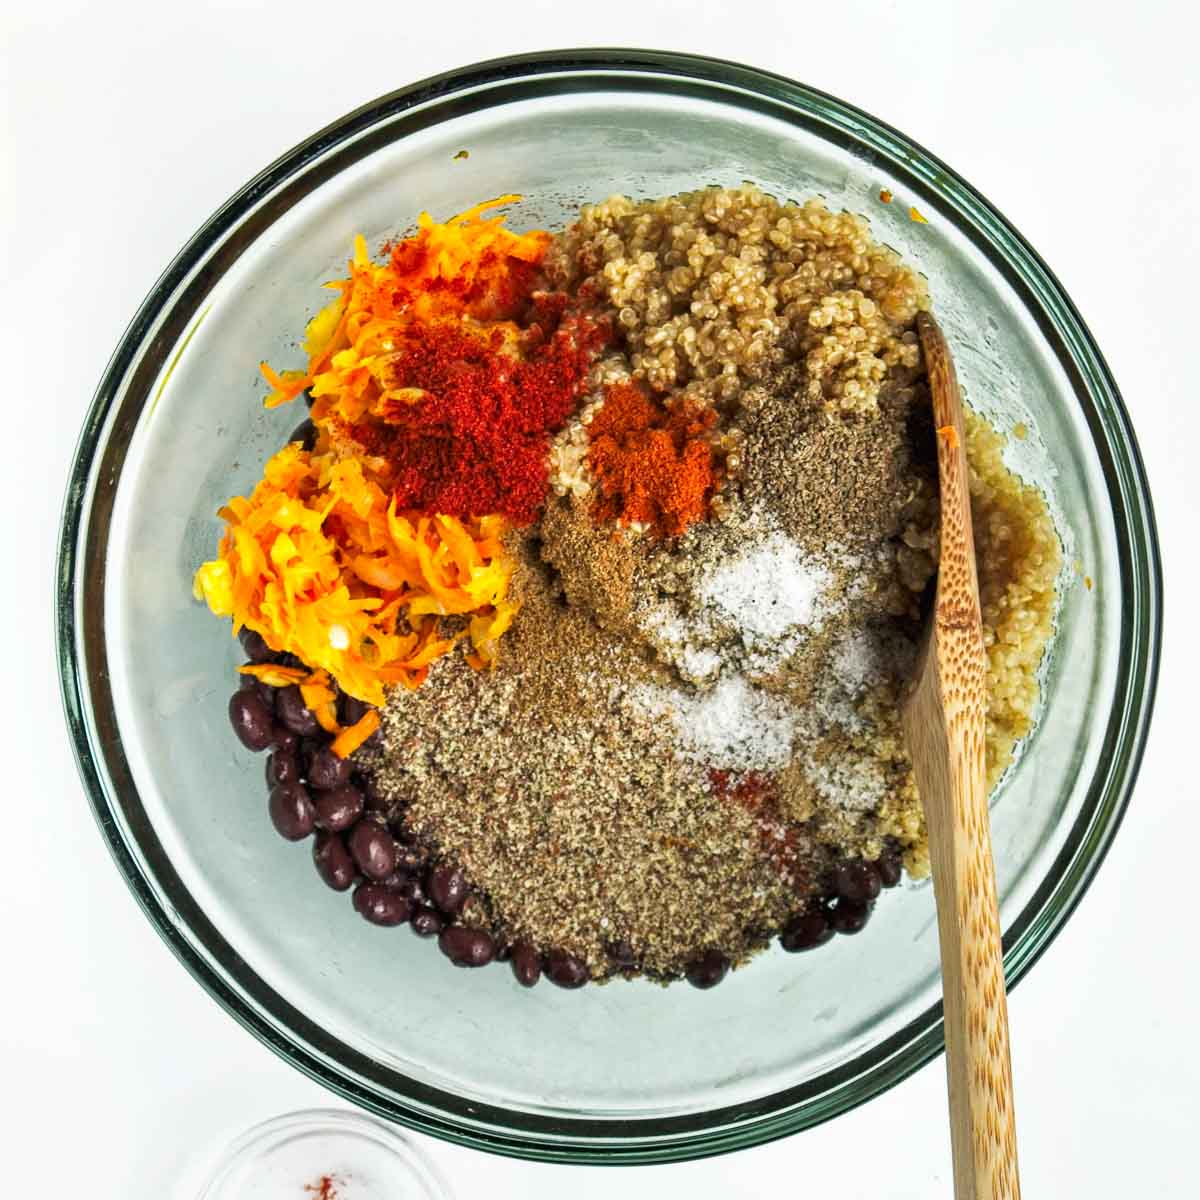 Ingredients to make black bean quinoa burgers in a bowl